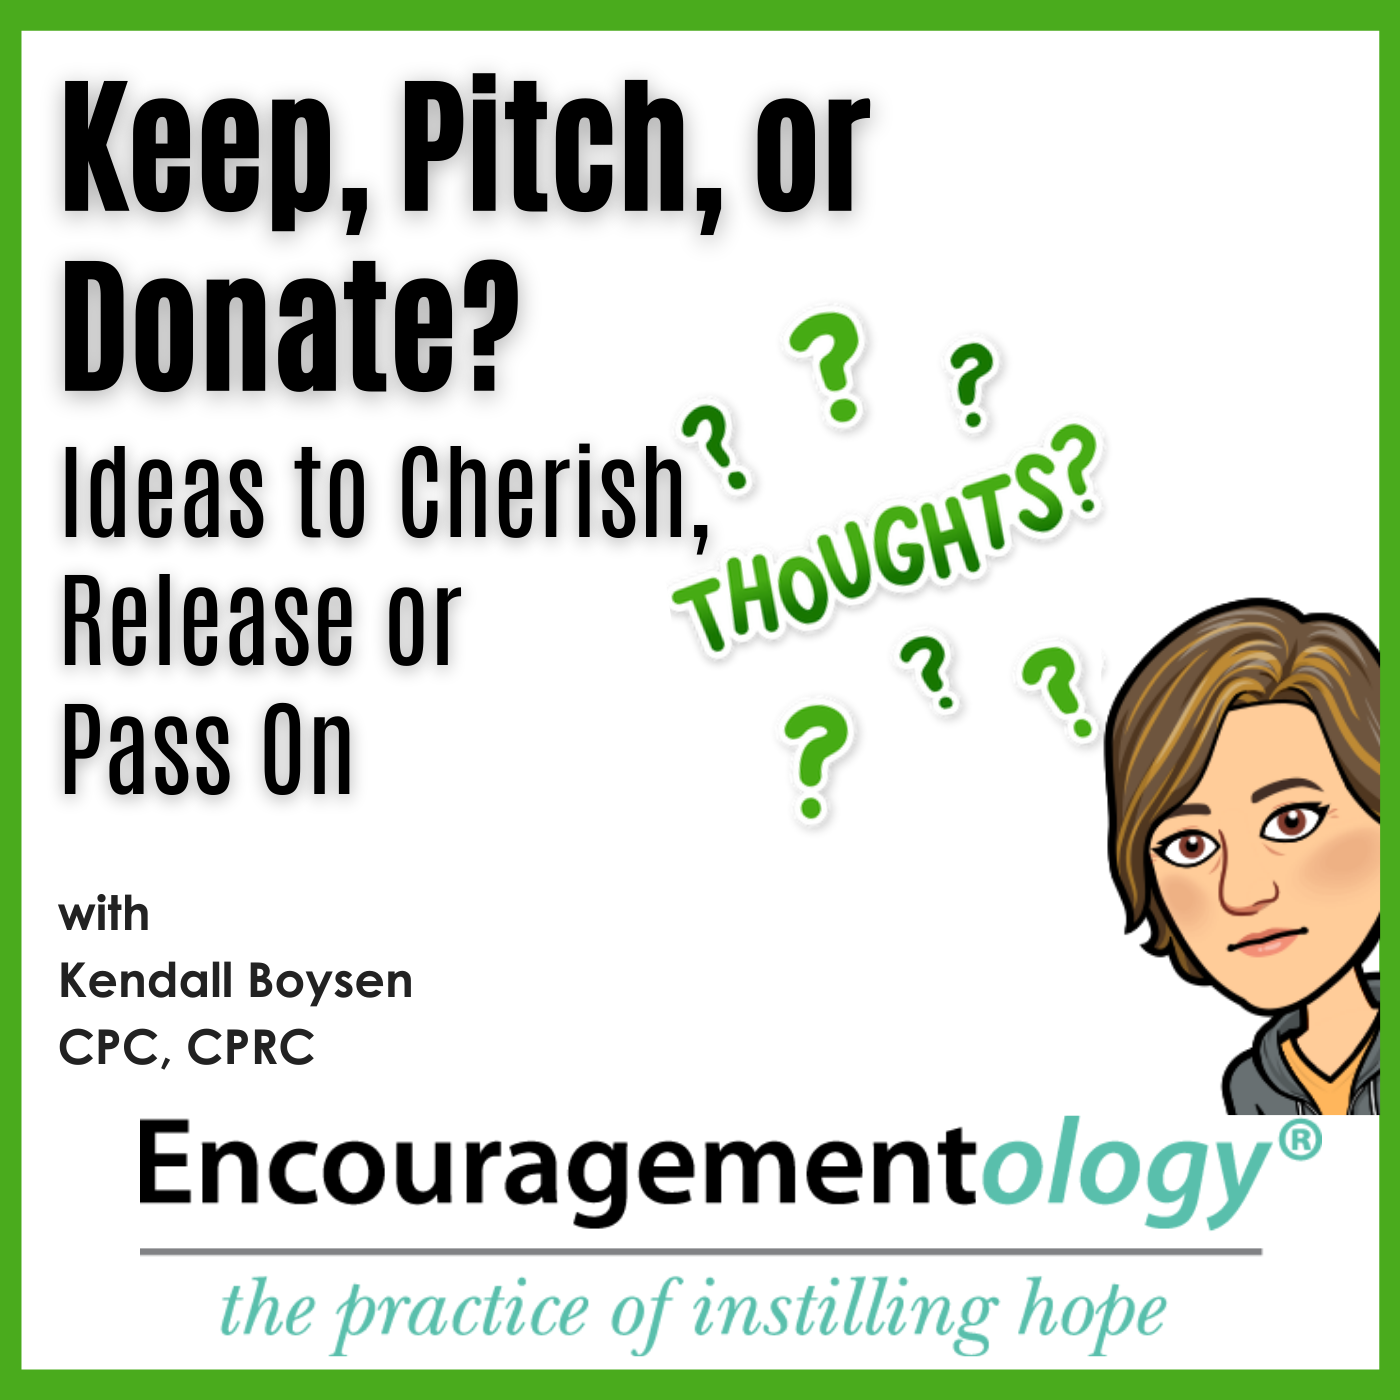 Keep, Pitch, or Donate? Ideas to Cherish, Release, and Pass On